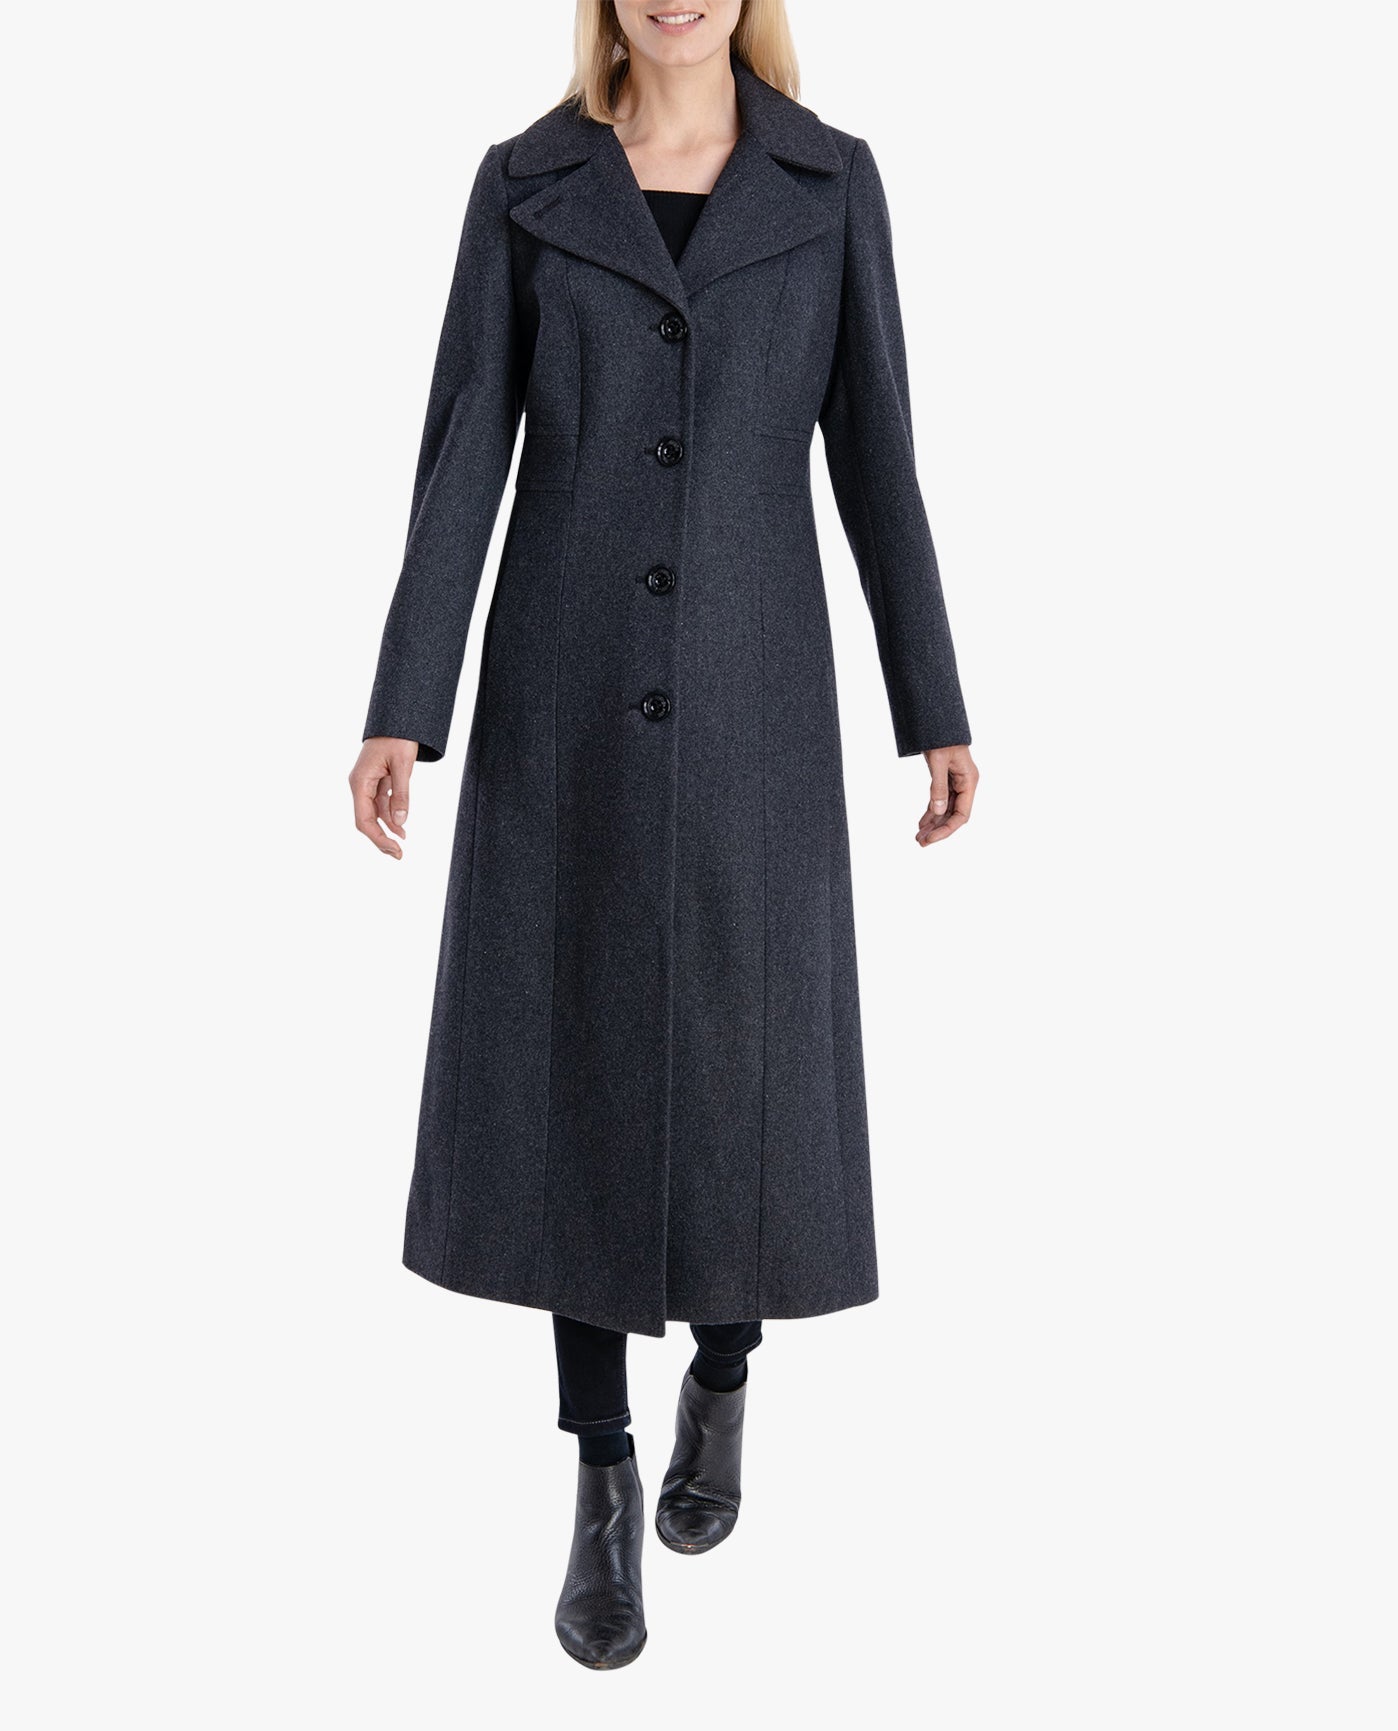 Front View Of SINGLE BREASTED MAXI PEACOAT | CHARCOAL